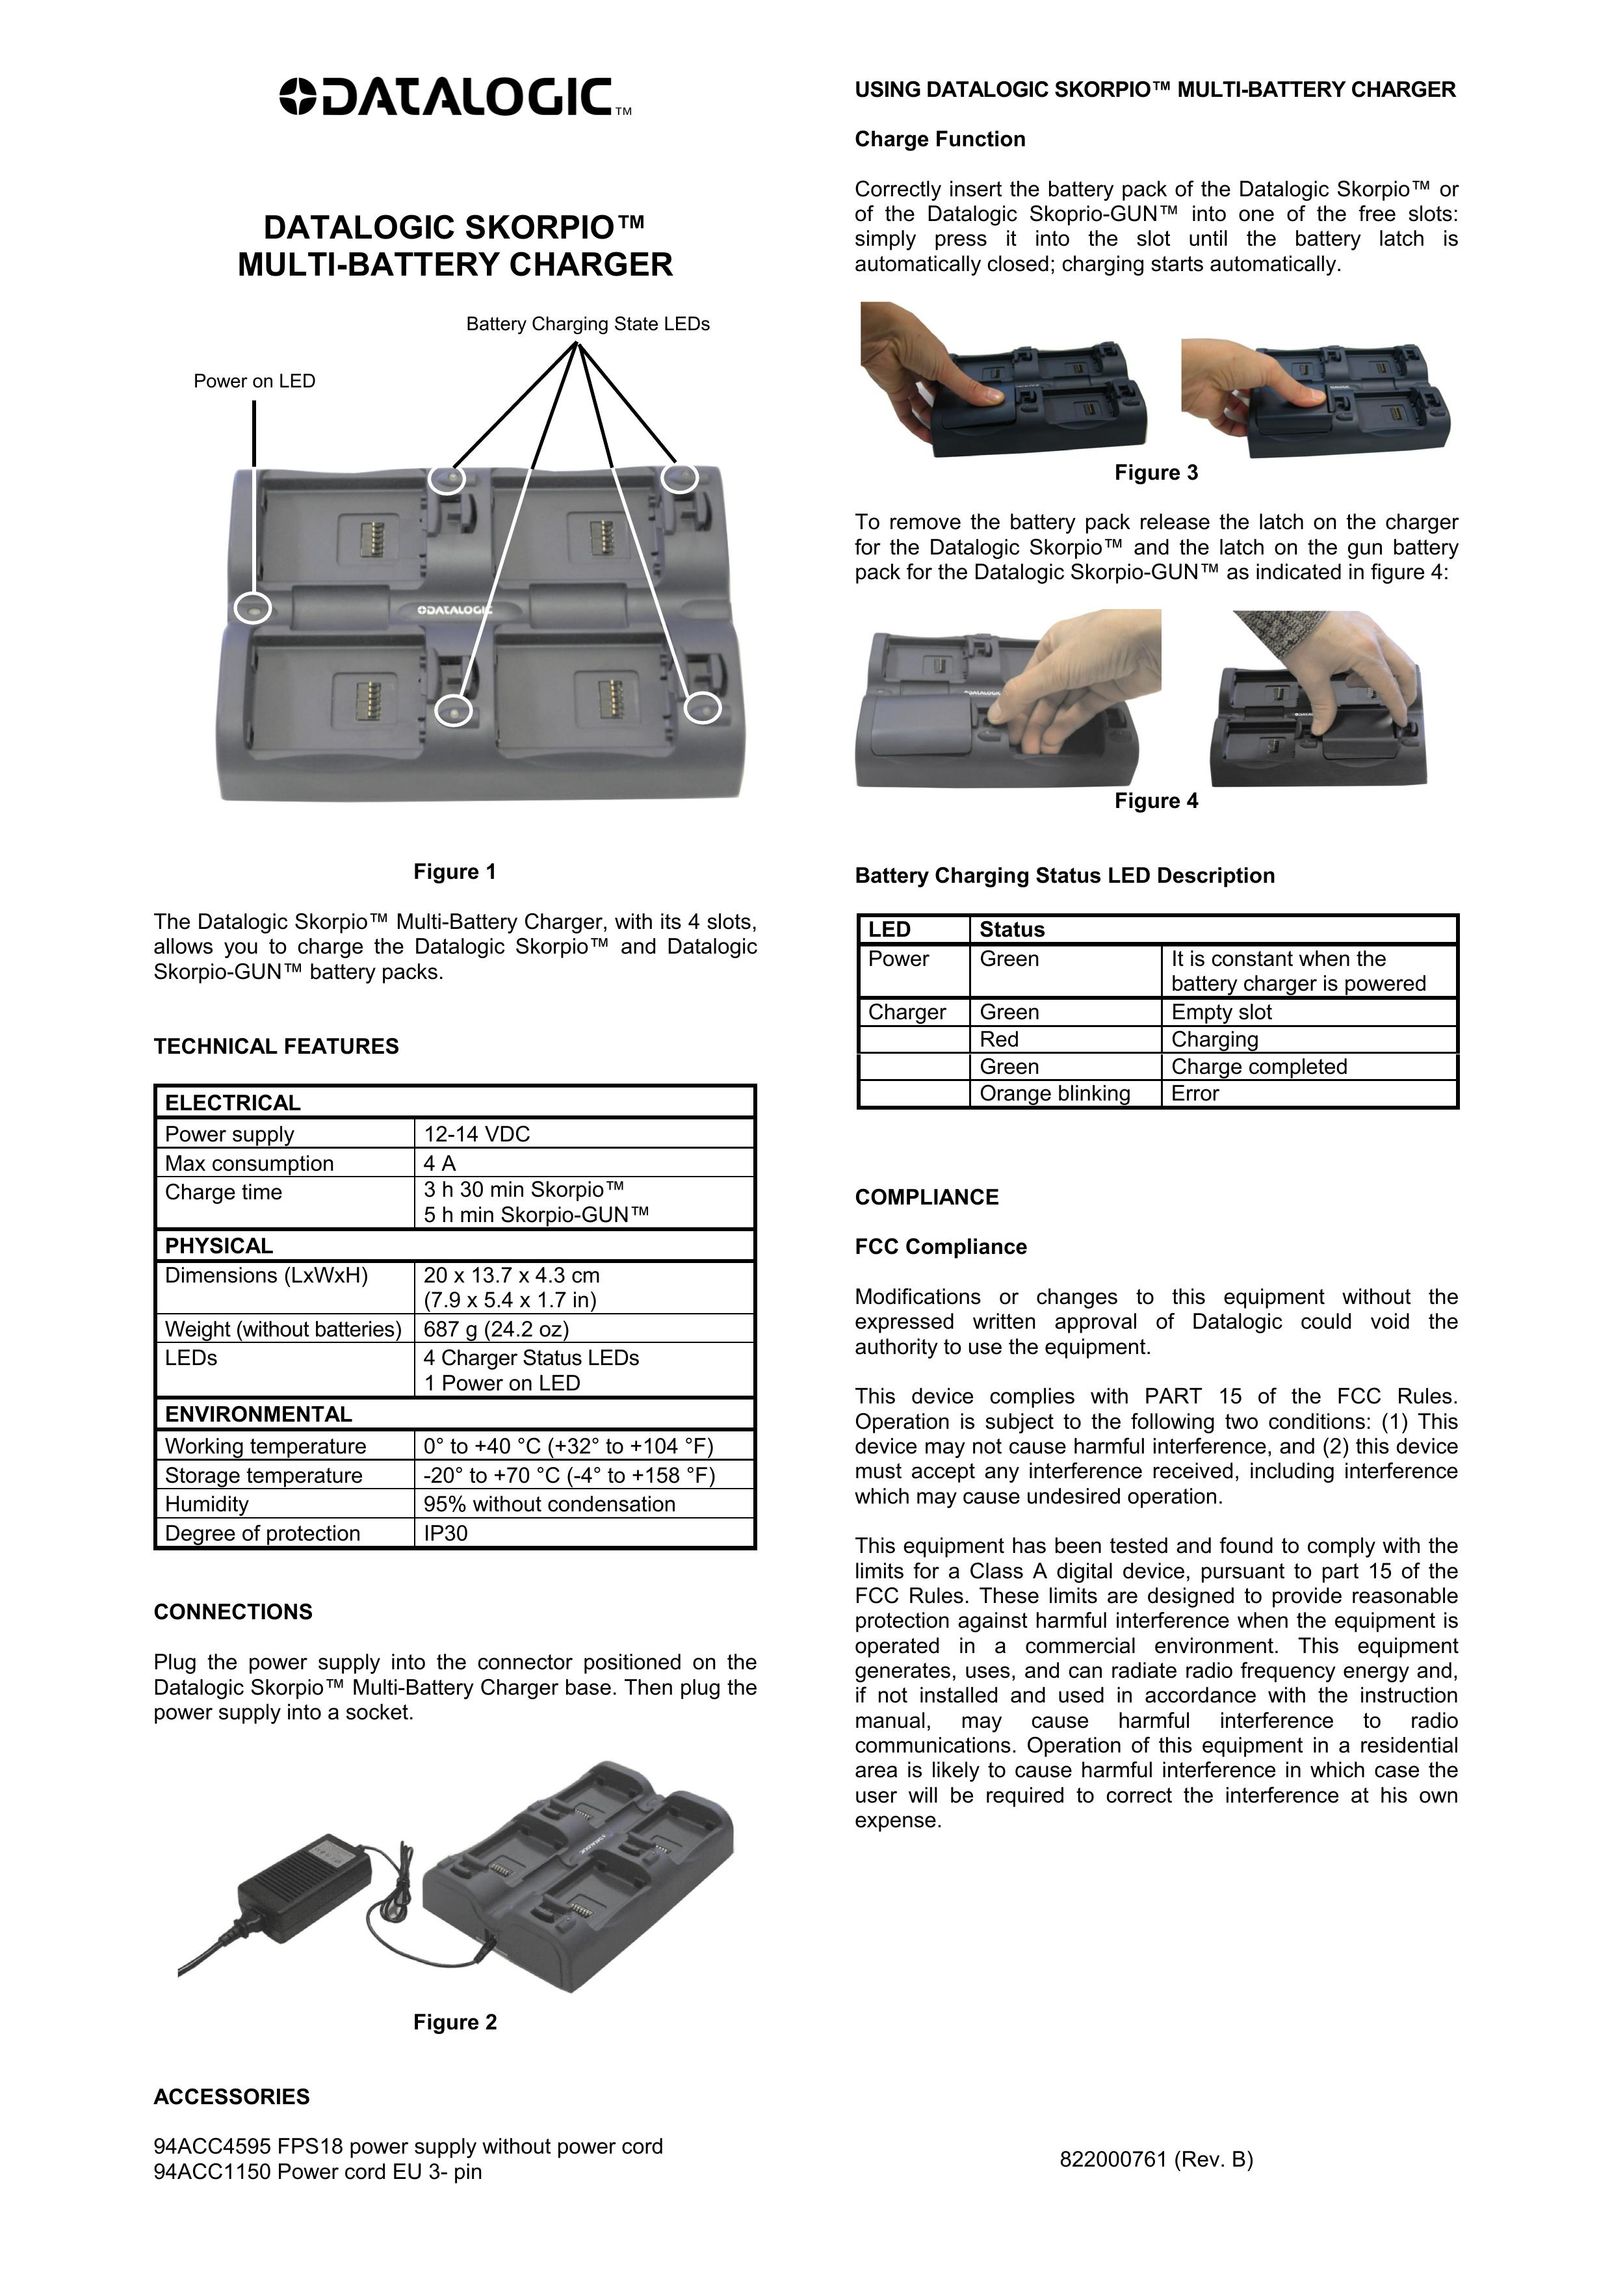 Datalogic Scanning Multi-Battery Charger Battery Charger User Manual